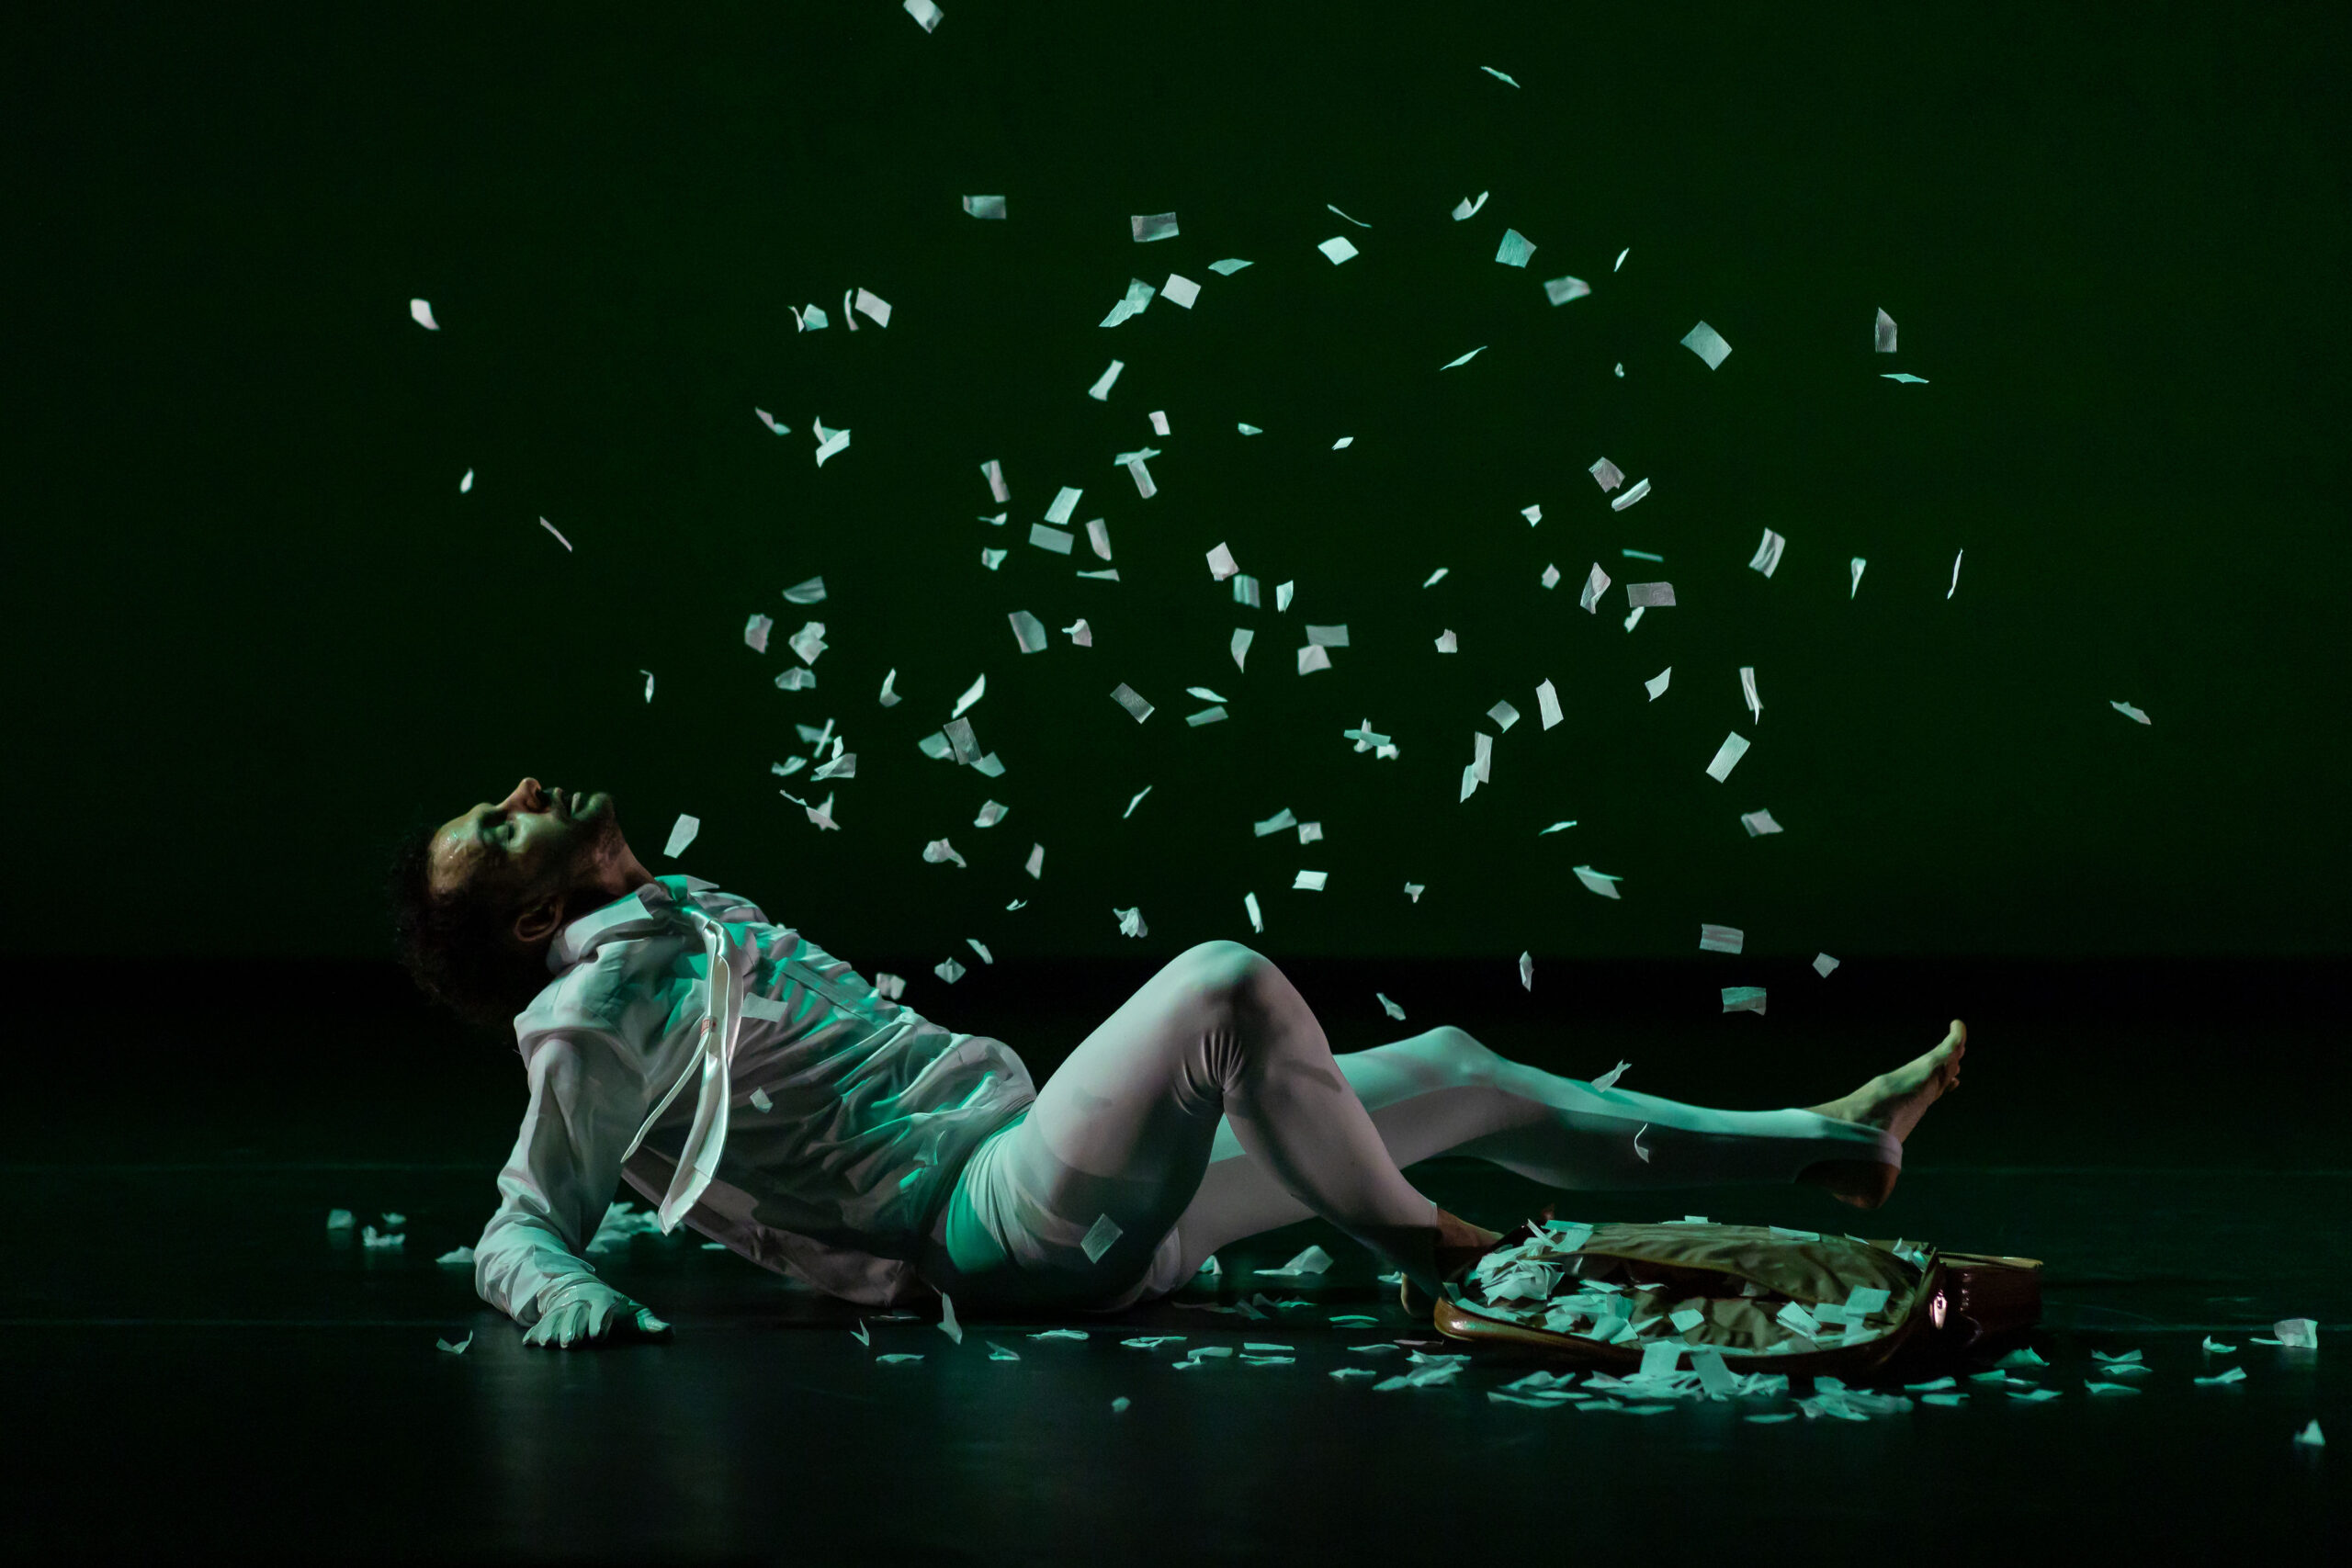 In a dark image, confetti rains down on a dancer who lies on the floor